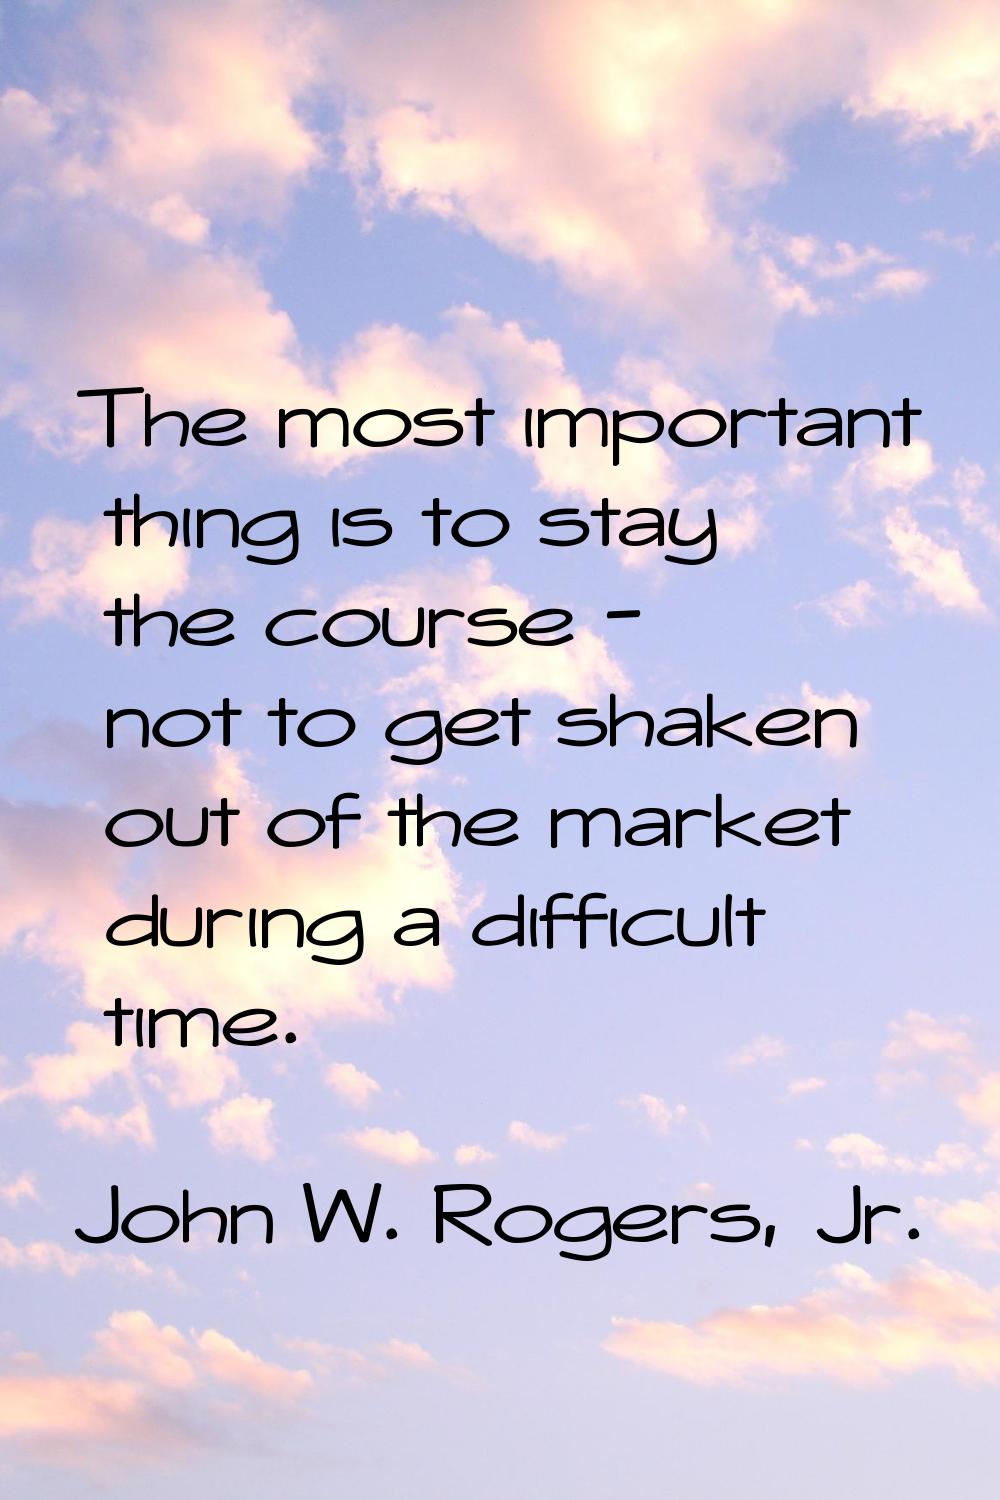 The most important thing is to stay the course - not to get shaken out of the market during a diffi